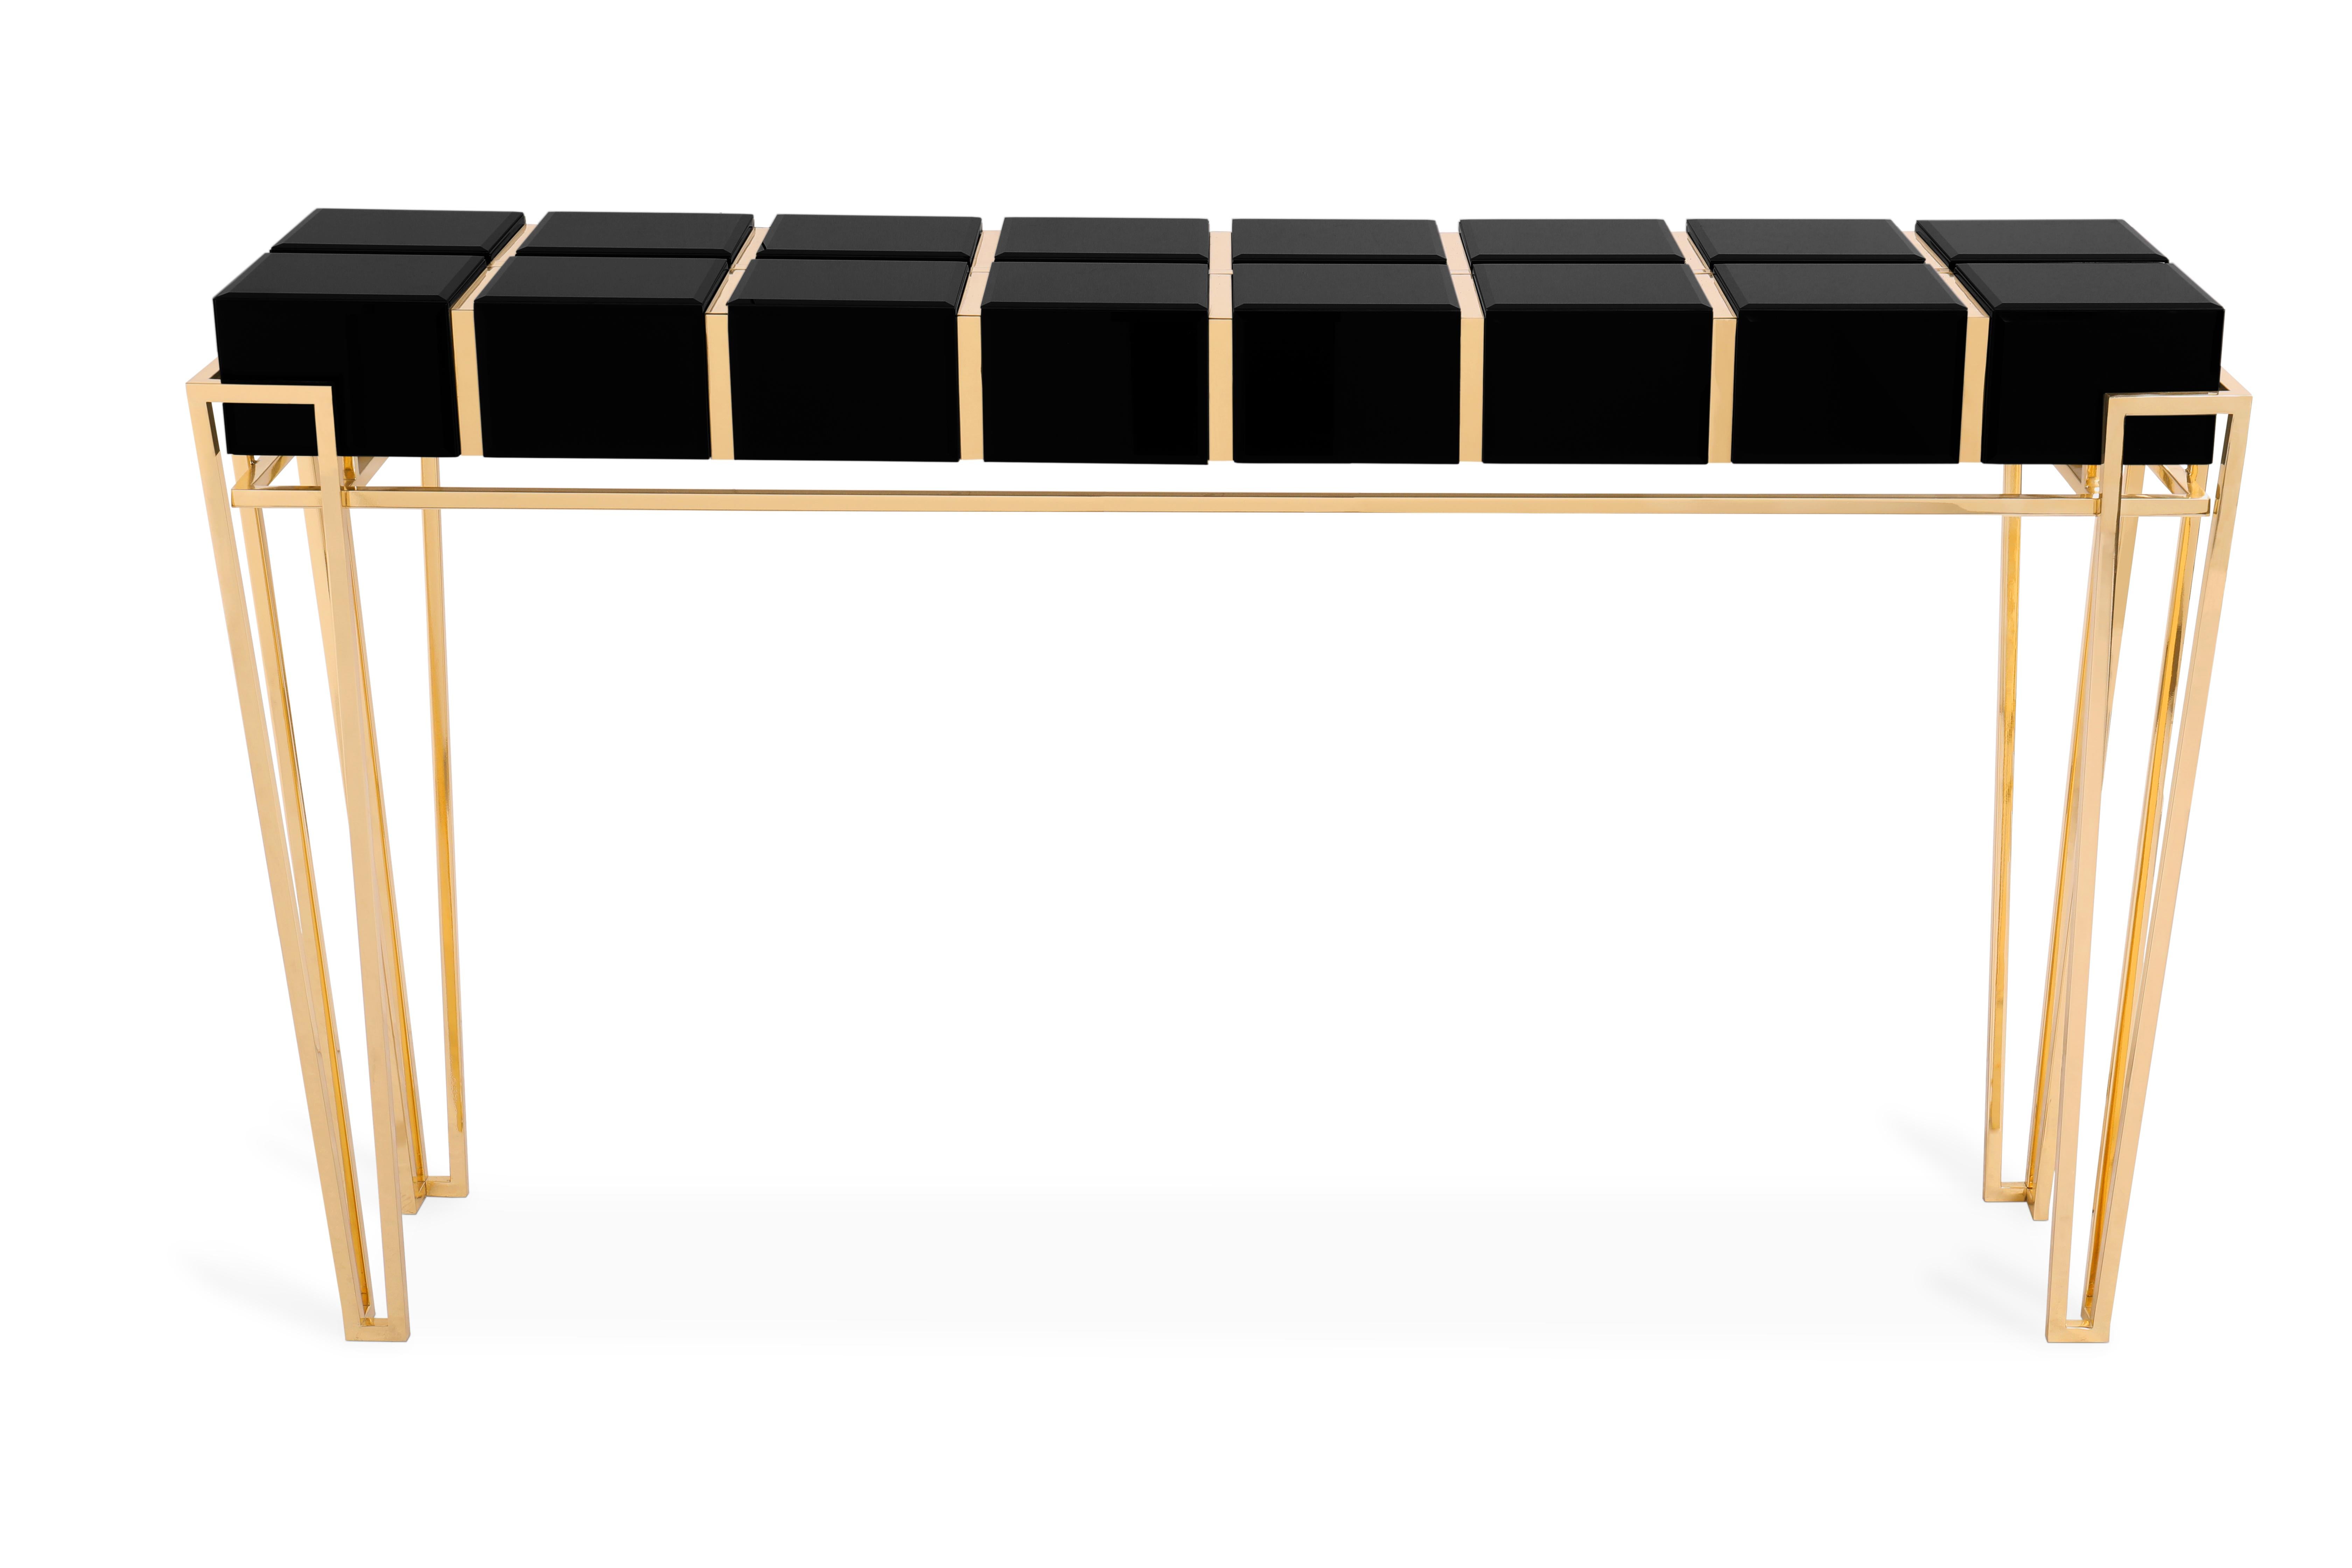 The glorious geometrical construction of the Nubian pyramids outcome a contrasting shape design. Characterized by its complexity of noble materials such as glass, walnut root veneer and brass, Nubian console is an elaborated embodiment of relief. A